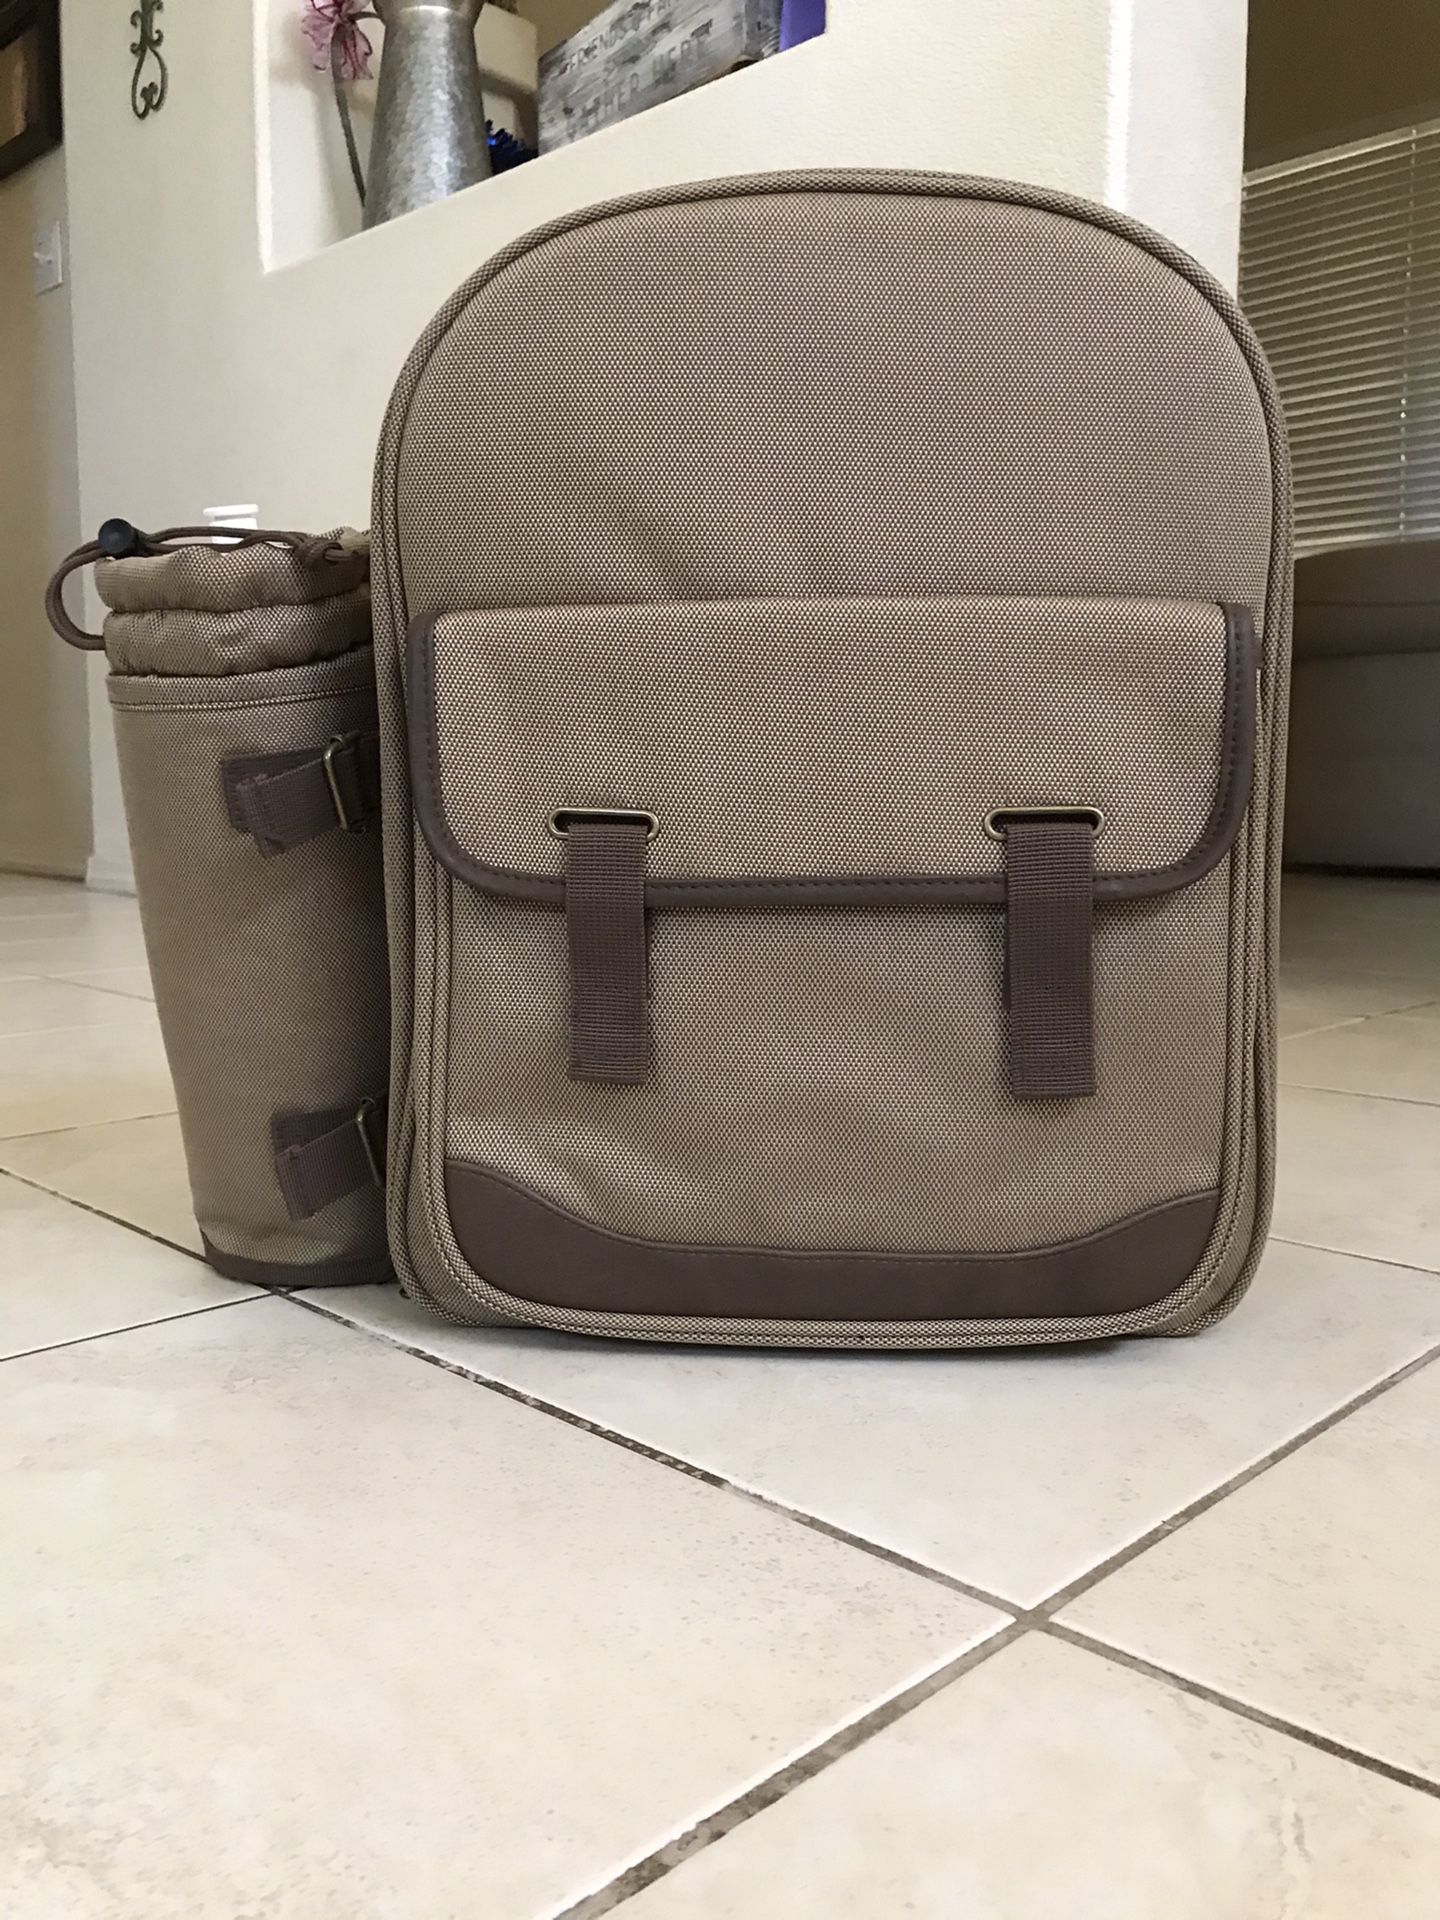 Brand new picnic backpack